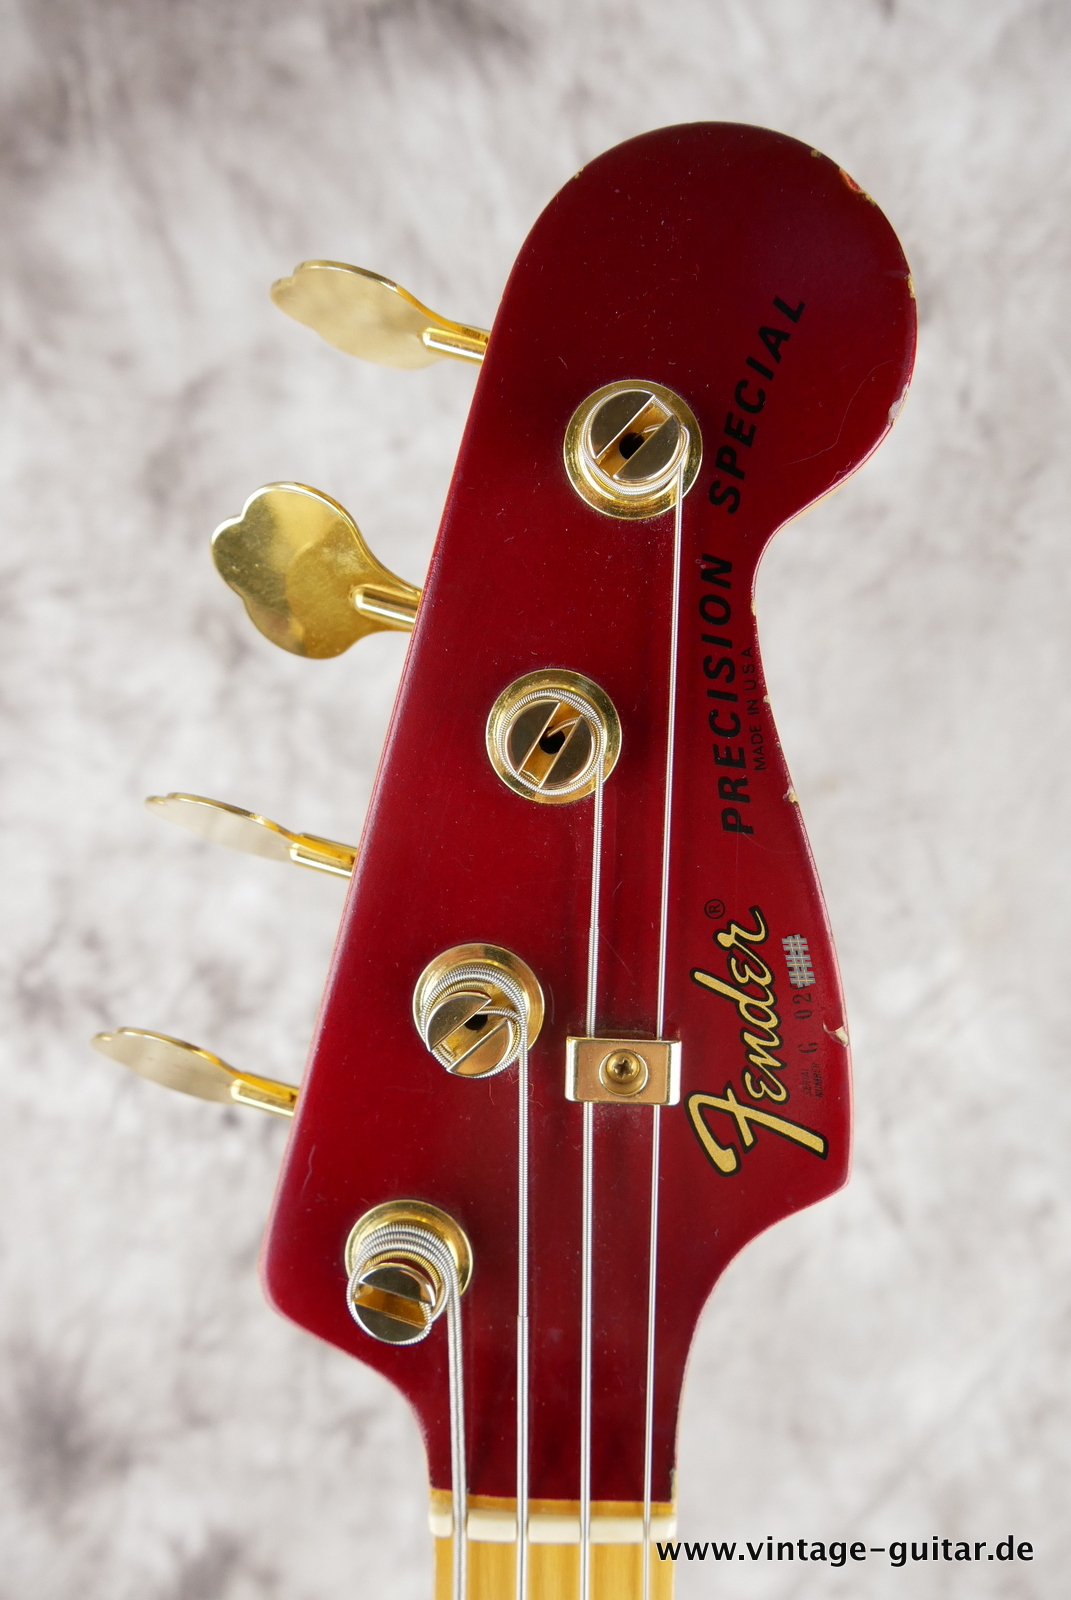 Fender_Precision_Special_USA_candy_apple_red_1982-009.JPG